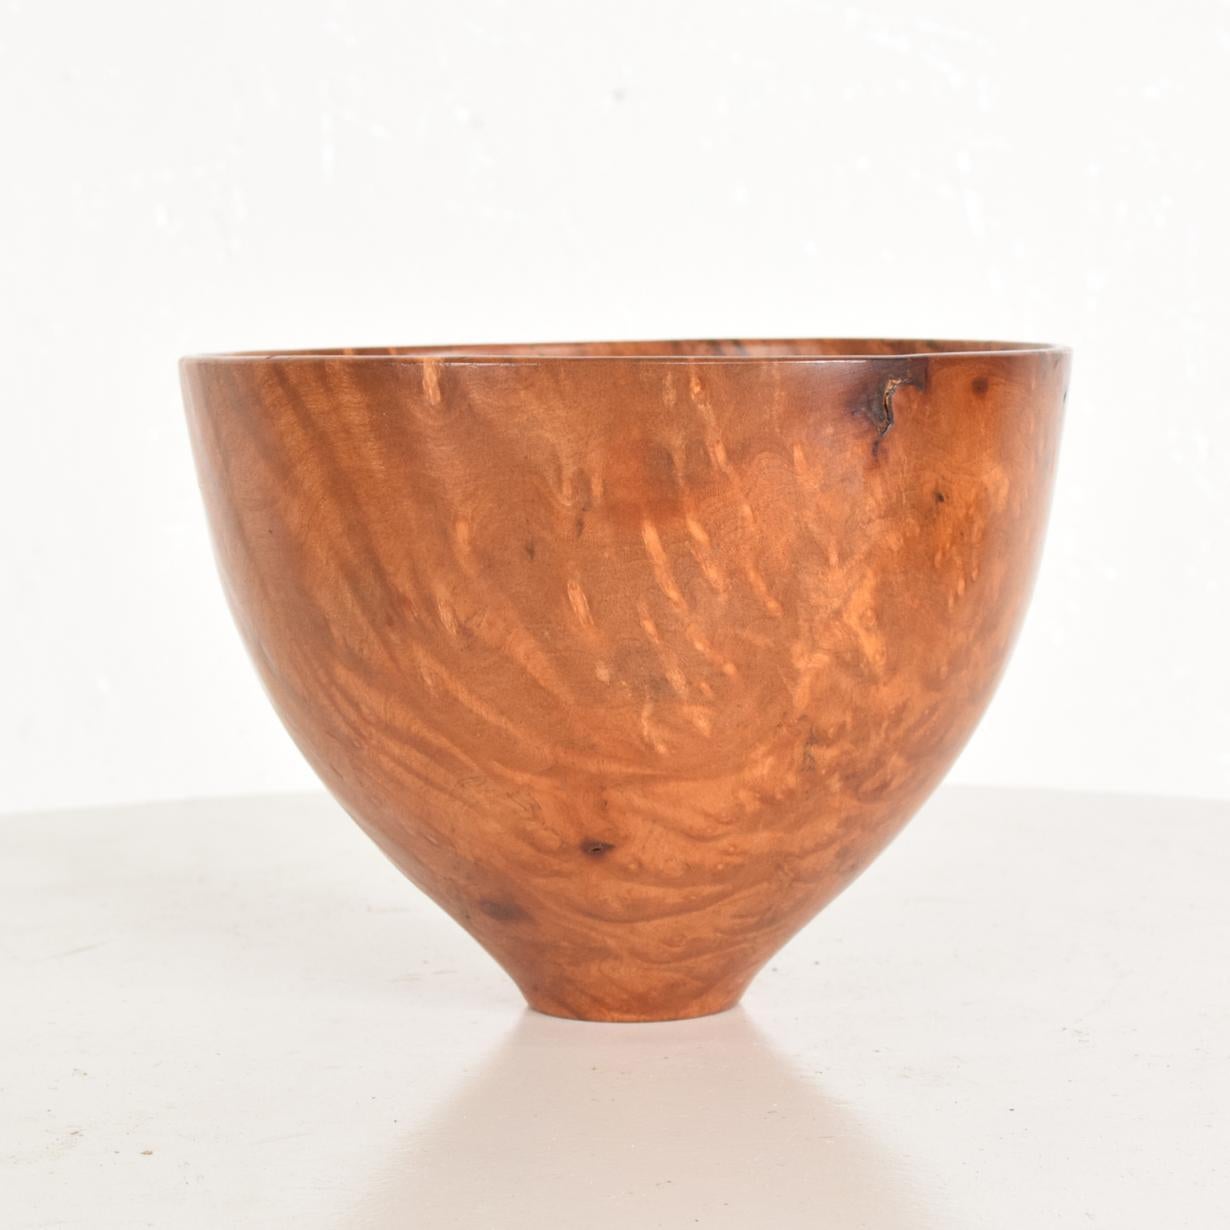 For your consideration, a beautiful hand turned bowl in madrone burl wood. Signed in the lower bottom, unable to read properly the signature, Dated 92'.

Dimensions: 4 1/4